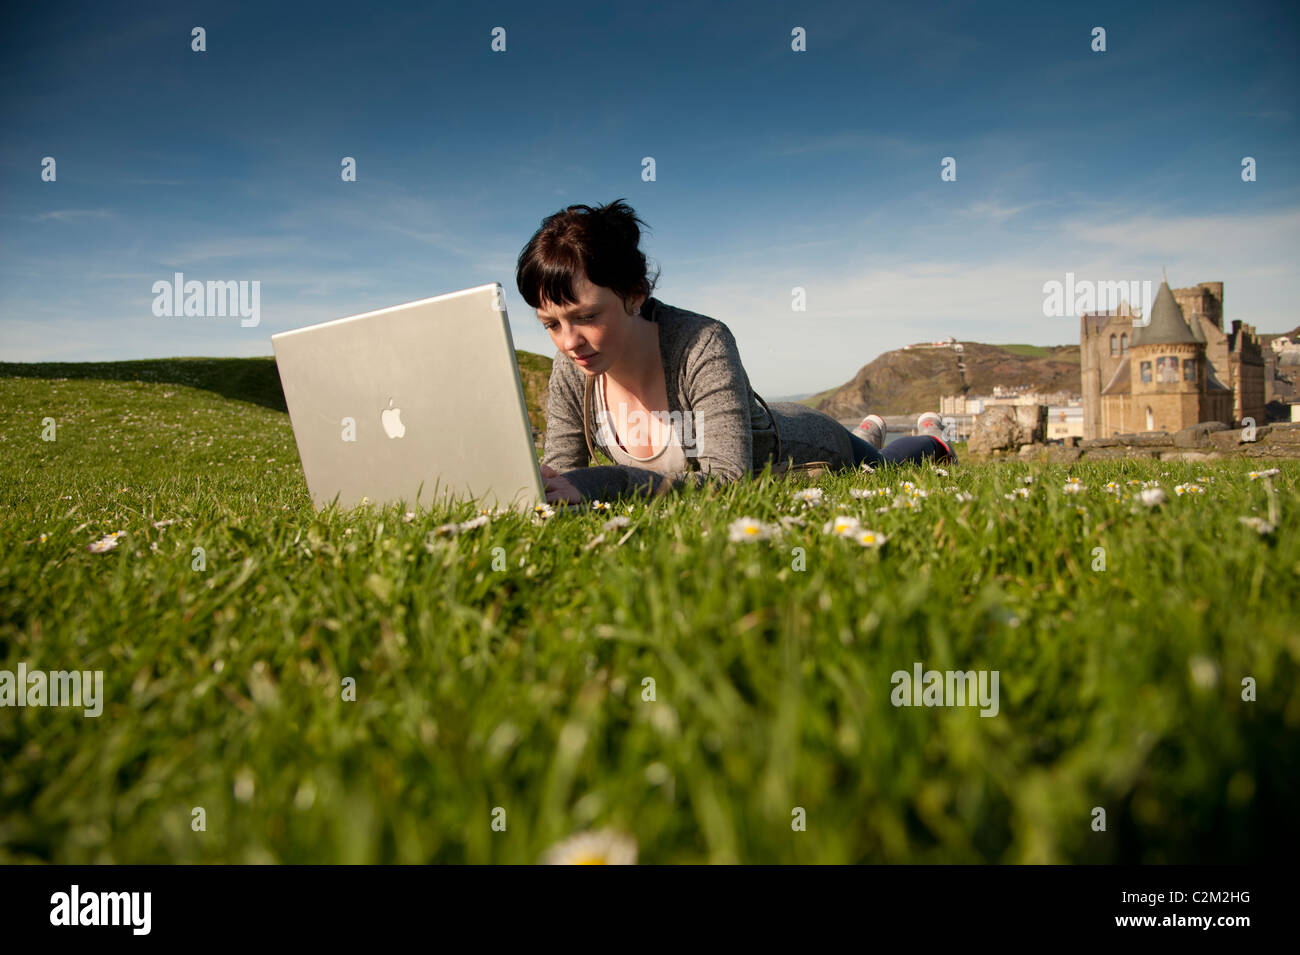 A young woman UK Aberystwyth university student working on her apple laptop computer outdoors on a sunny warm day Stock Photo